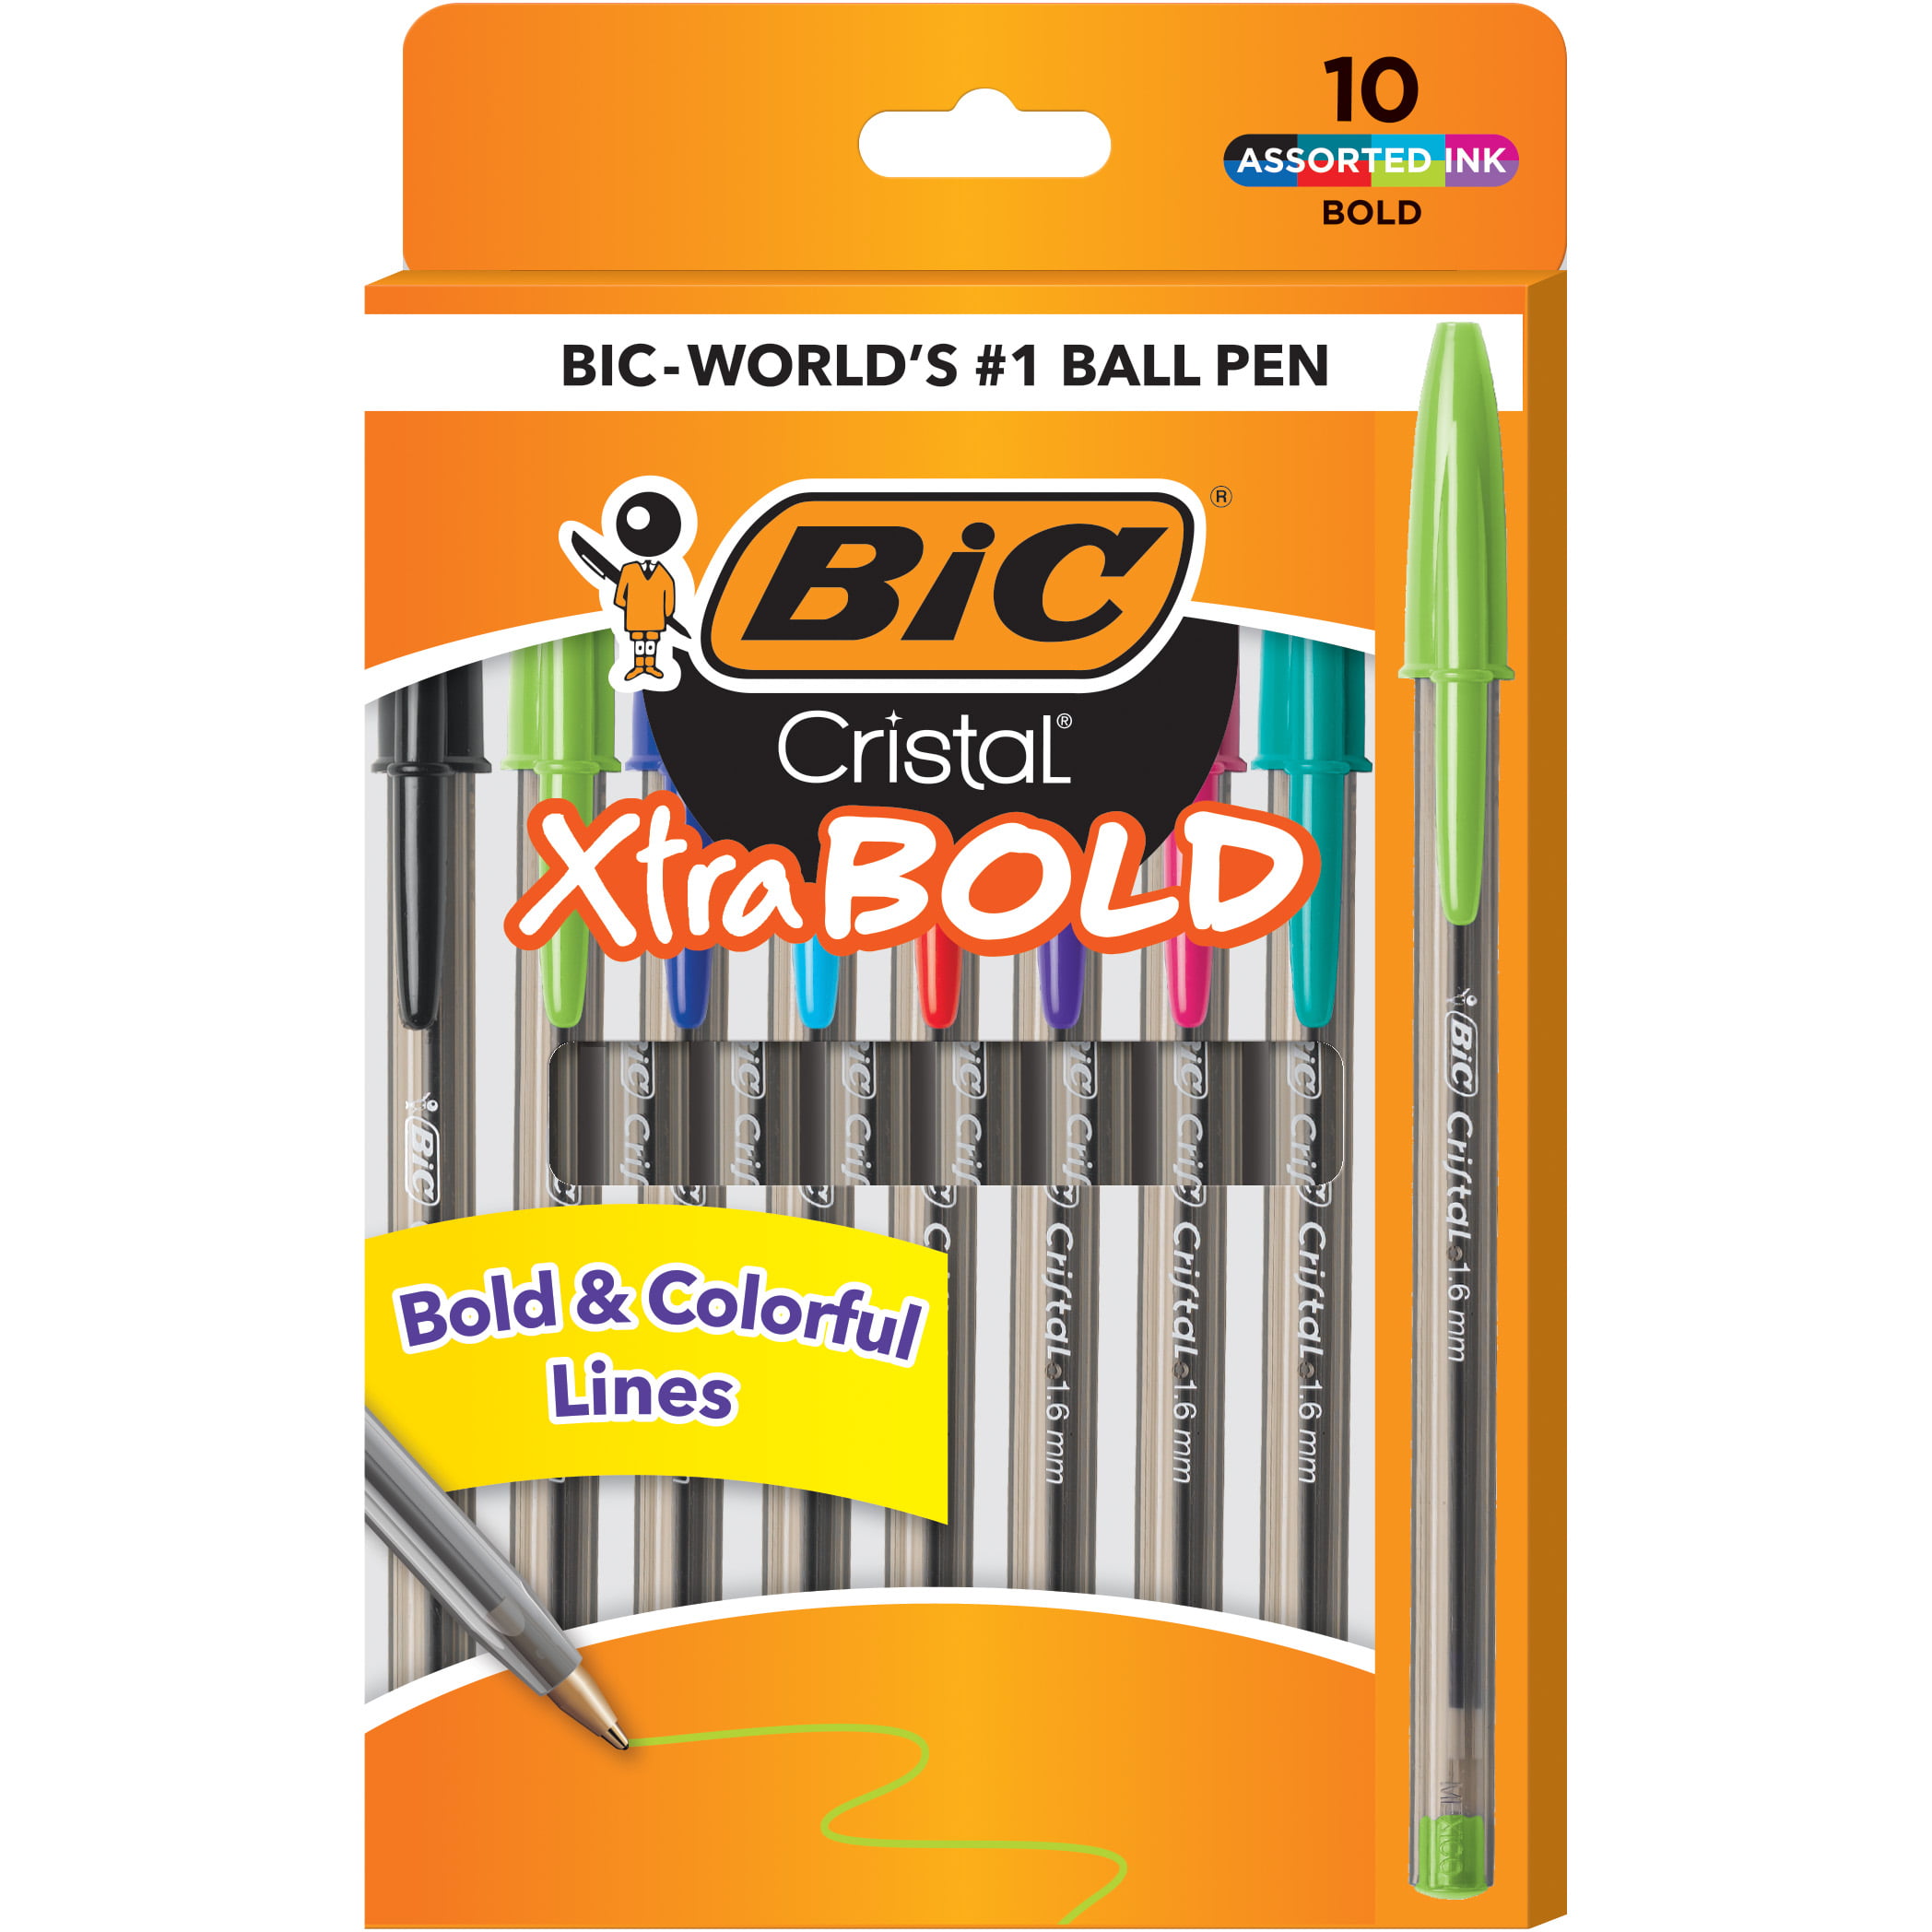 BIC Cristal Ballpoint Stick Pens Bold Point Assorted Ink 24/pack Msbapp241 for sale online 